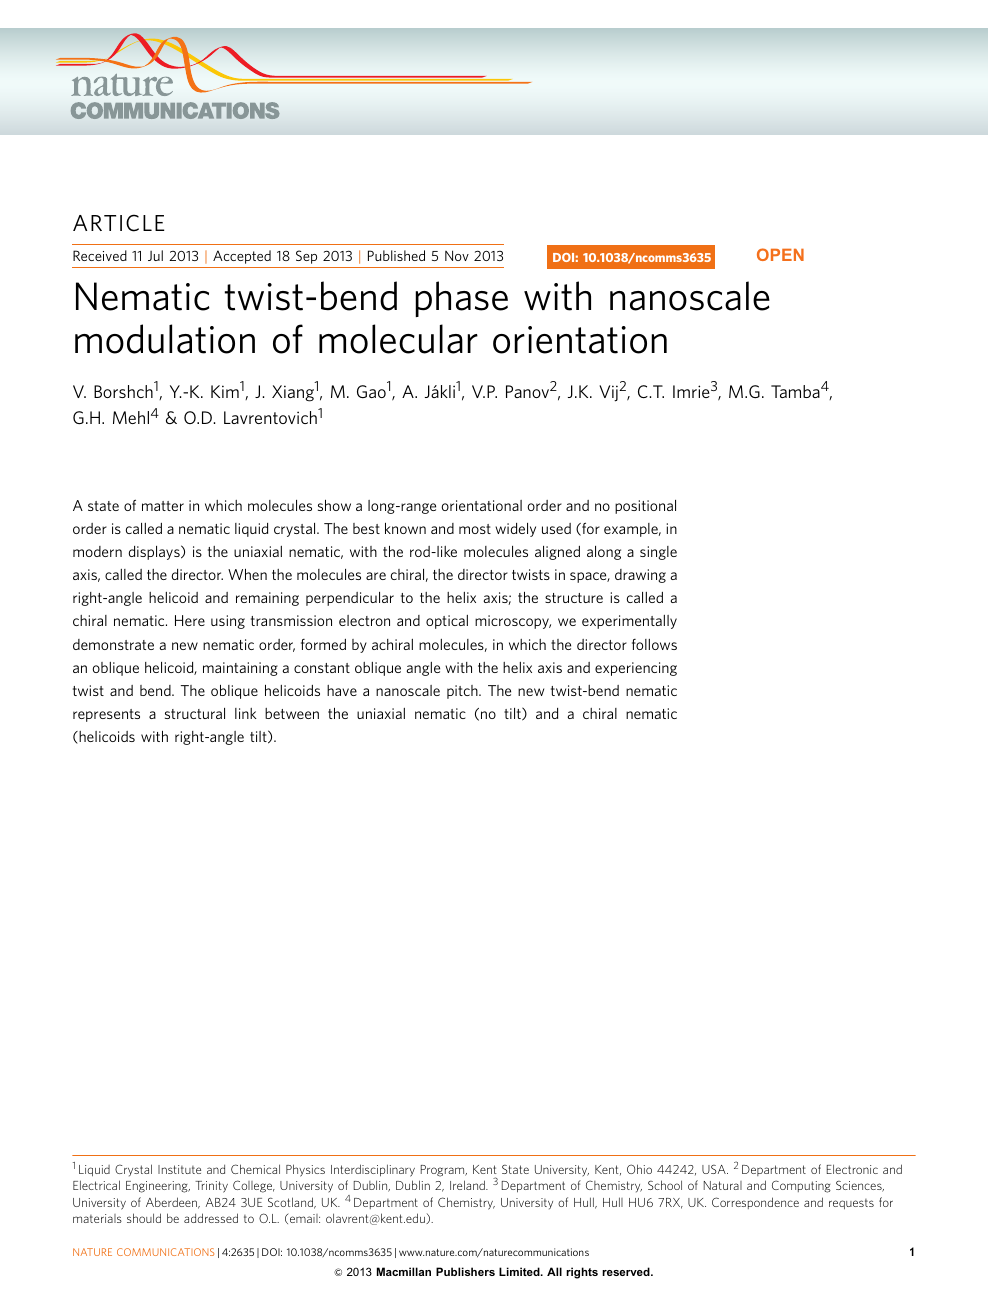 Nematic Twist Bend Phase With Nanoscale Modulation Of Molecular Orientation Topic Of Research Paper In Materials Engineering Download Scholarly Article Pdf And Read For Free On Cyberleninka Open Science Hub